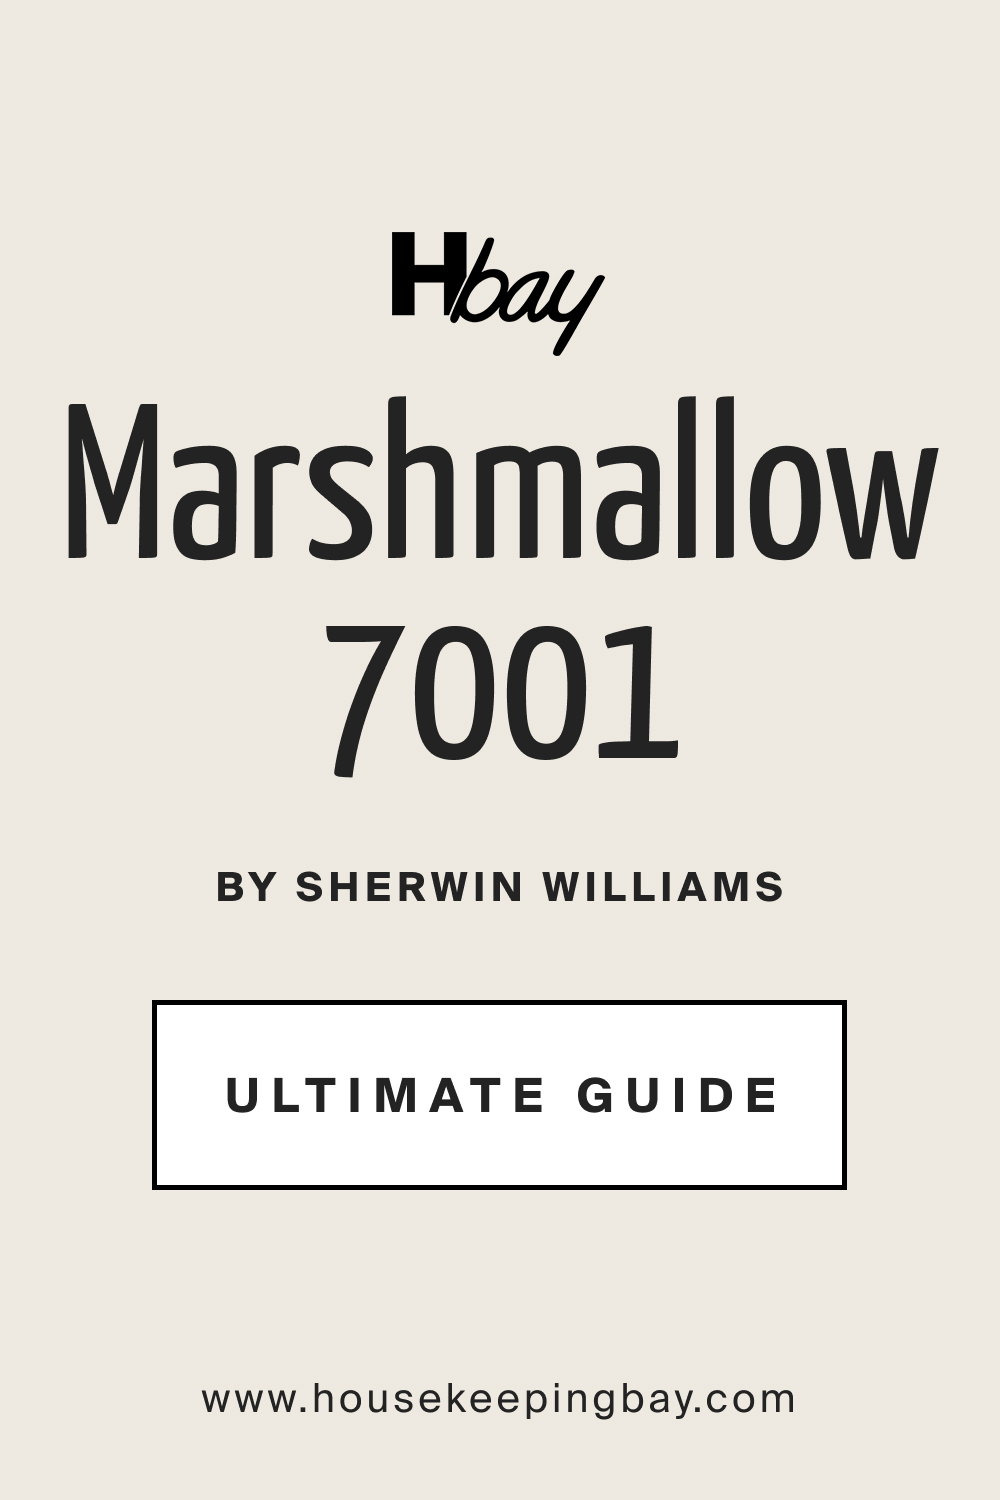 Marshmallow SW 7001 by Sherwin Williams Ultimate Guide